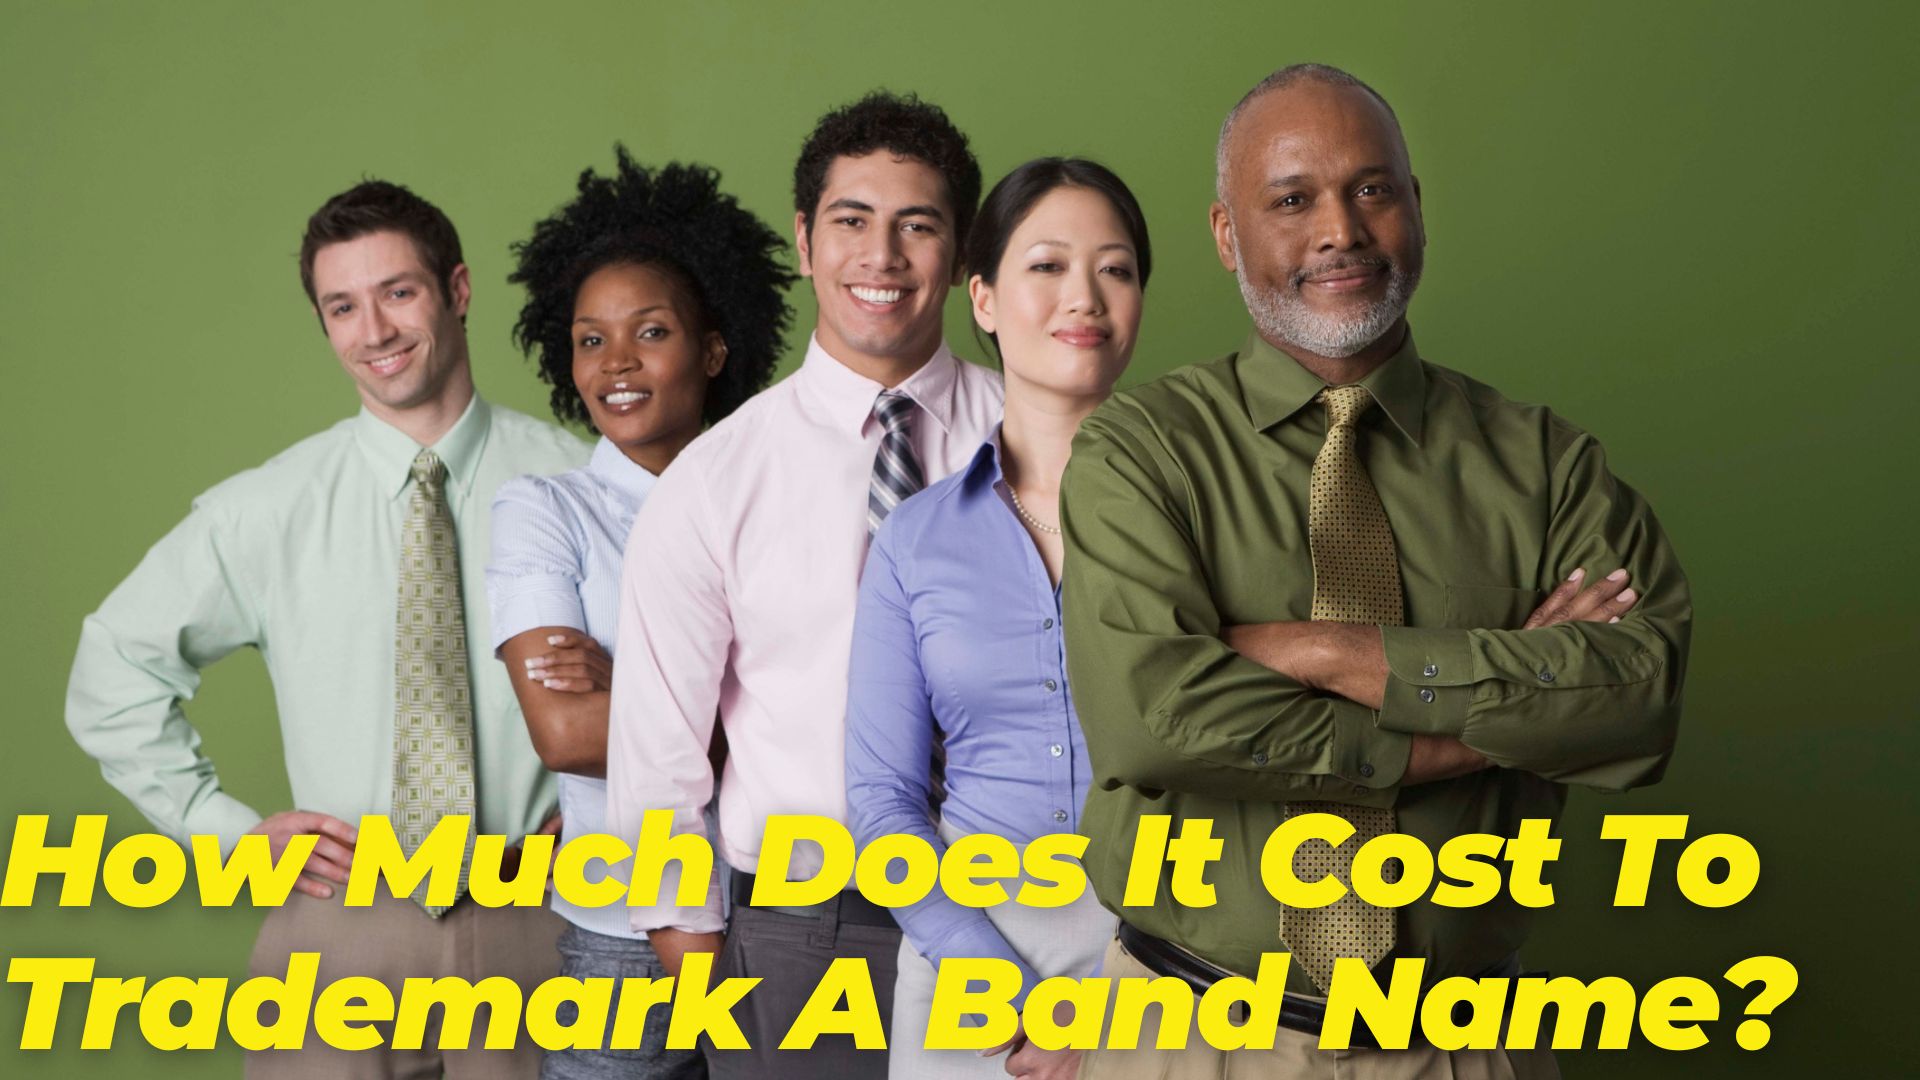 How Much Does It Cost To Trademark A Band Name?